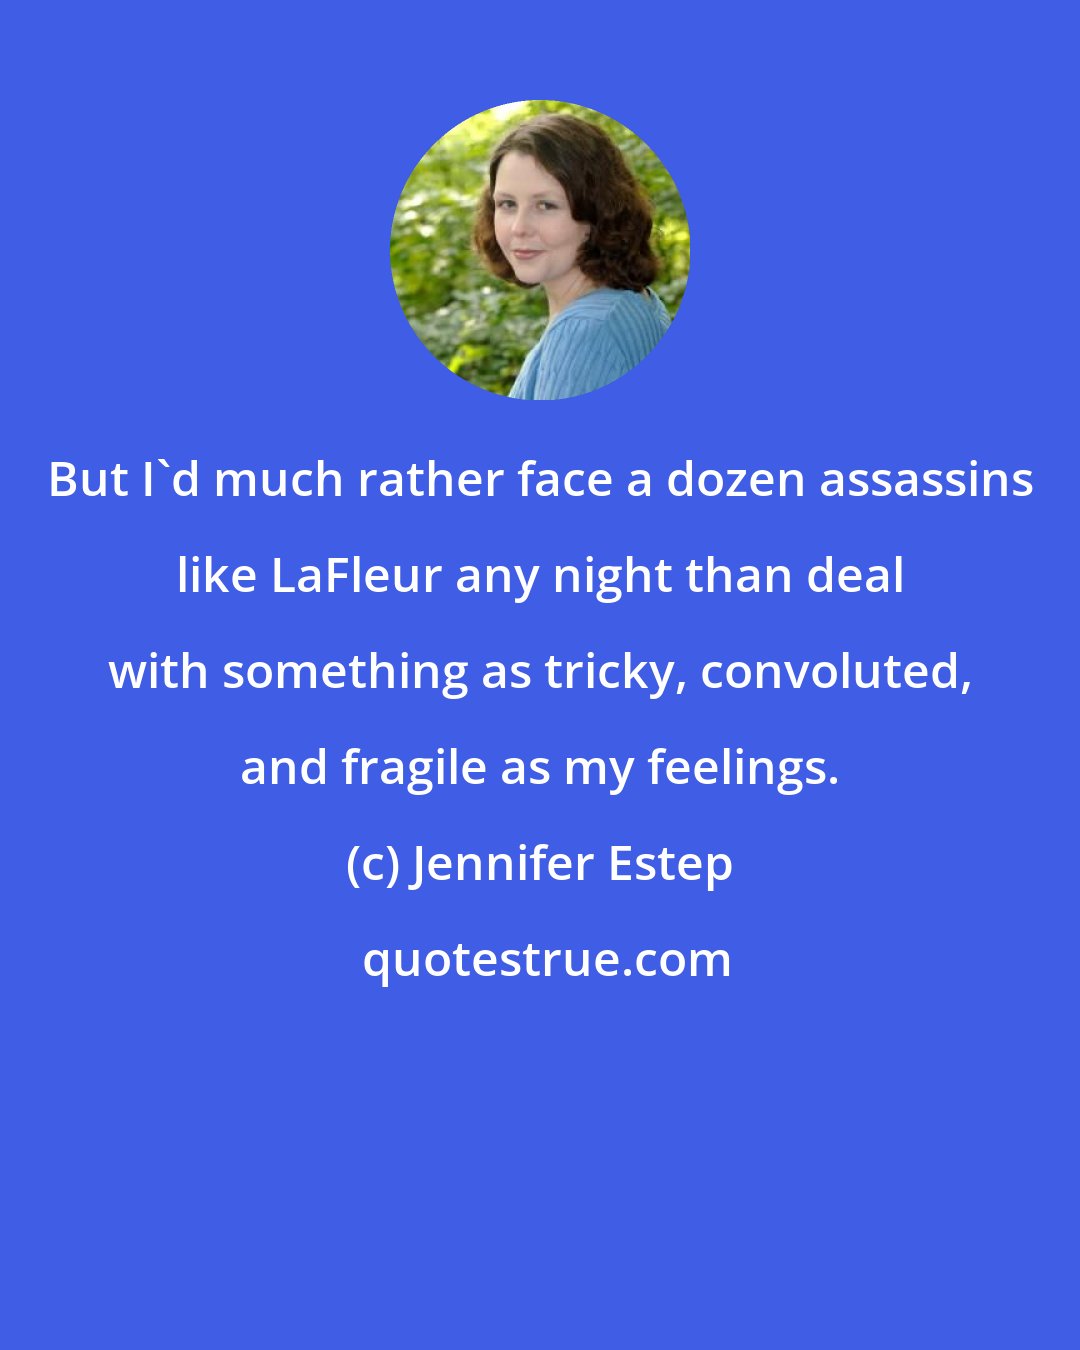 Jennifer Estep: But I'd much rather face a dozen assassins like LaFleur any night than deal with something as tricky, convoluted, and fragile as my feelings.